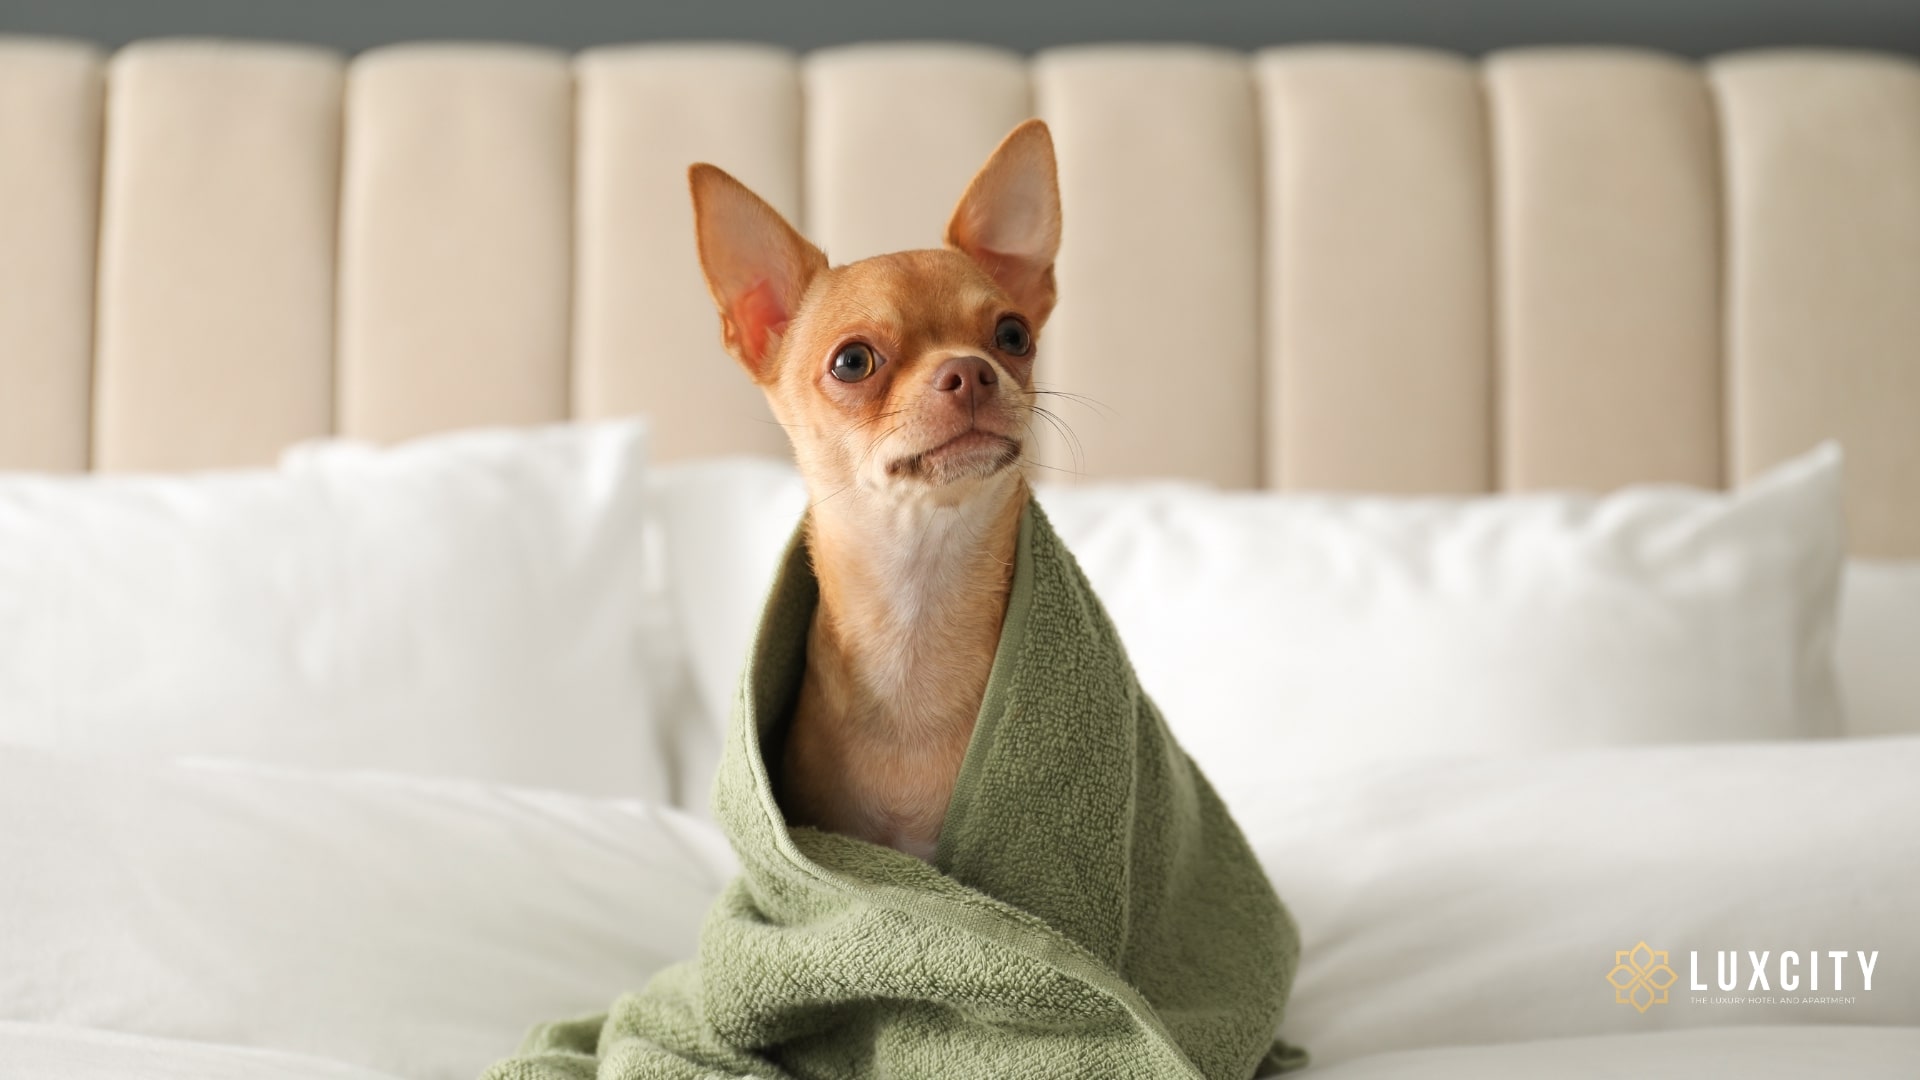 Pet-friendly hotels are the new frontier of pet-friendly vacations, allowing us to spend our vacations with our entire family